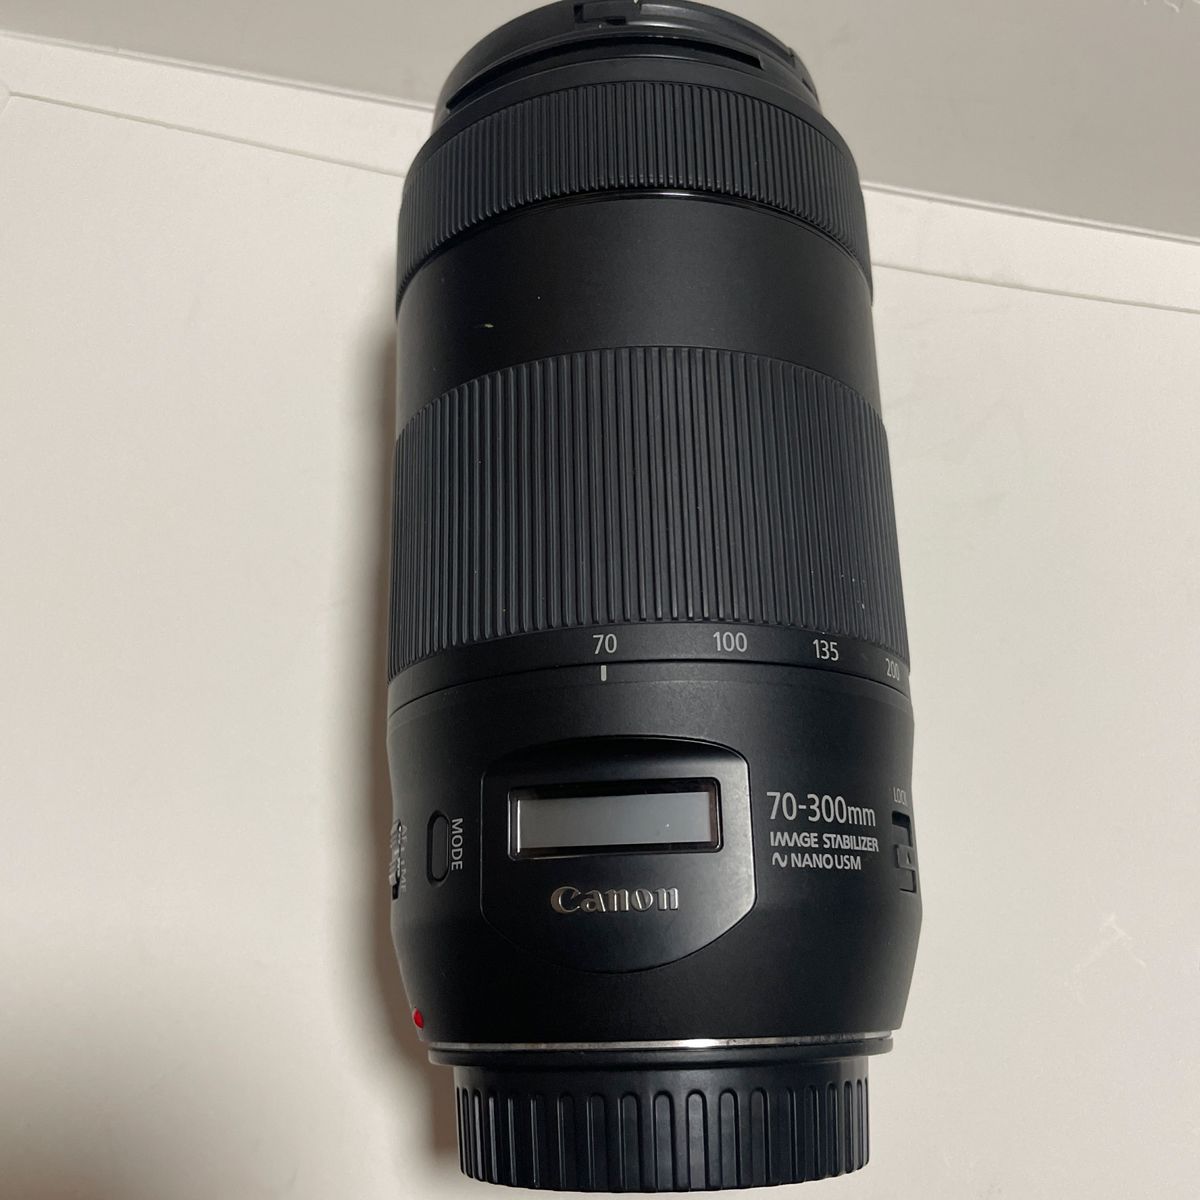 CANON EF 70-300mm f/4-5.6 IS Ⅱ USM